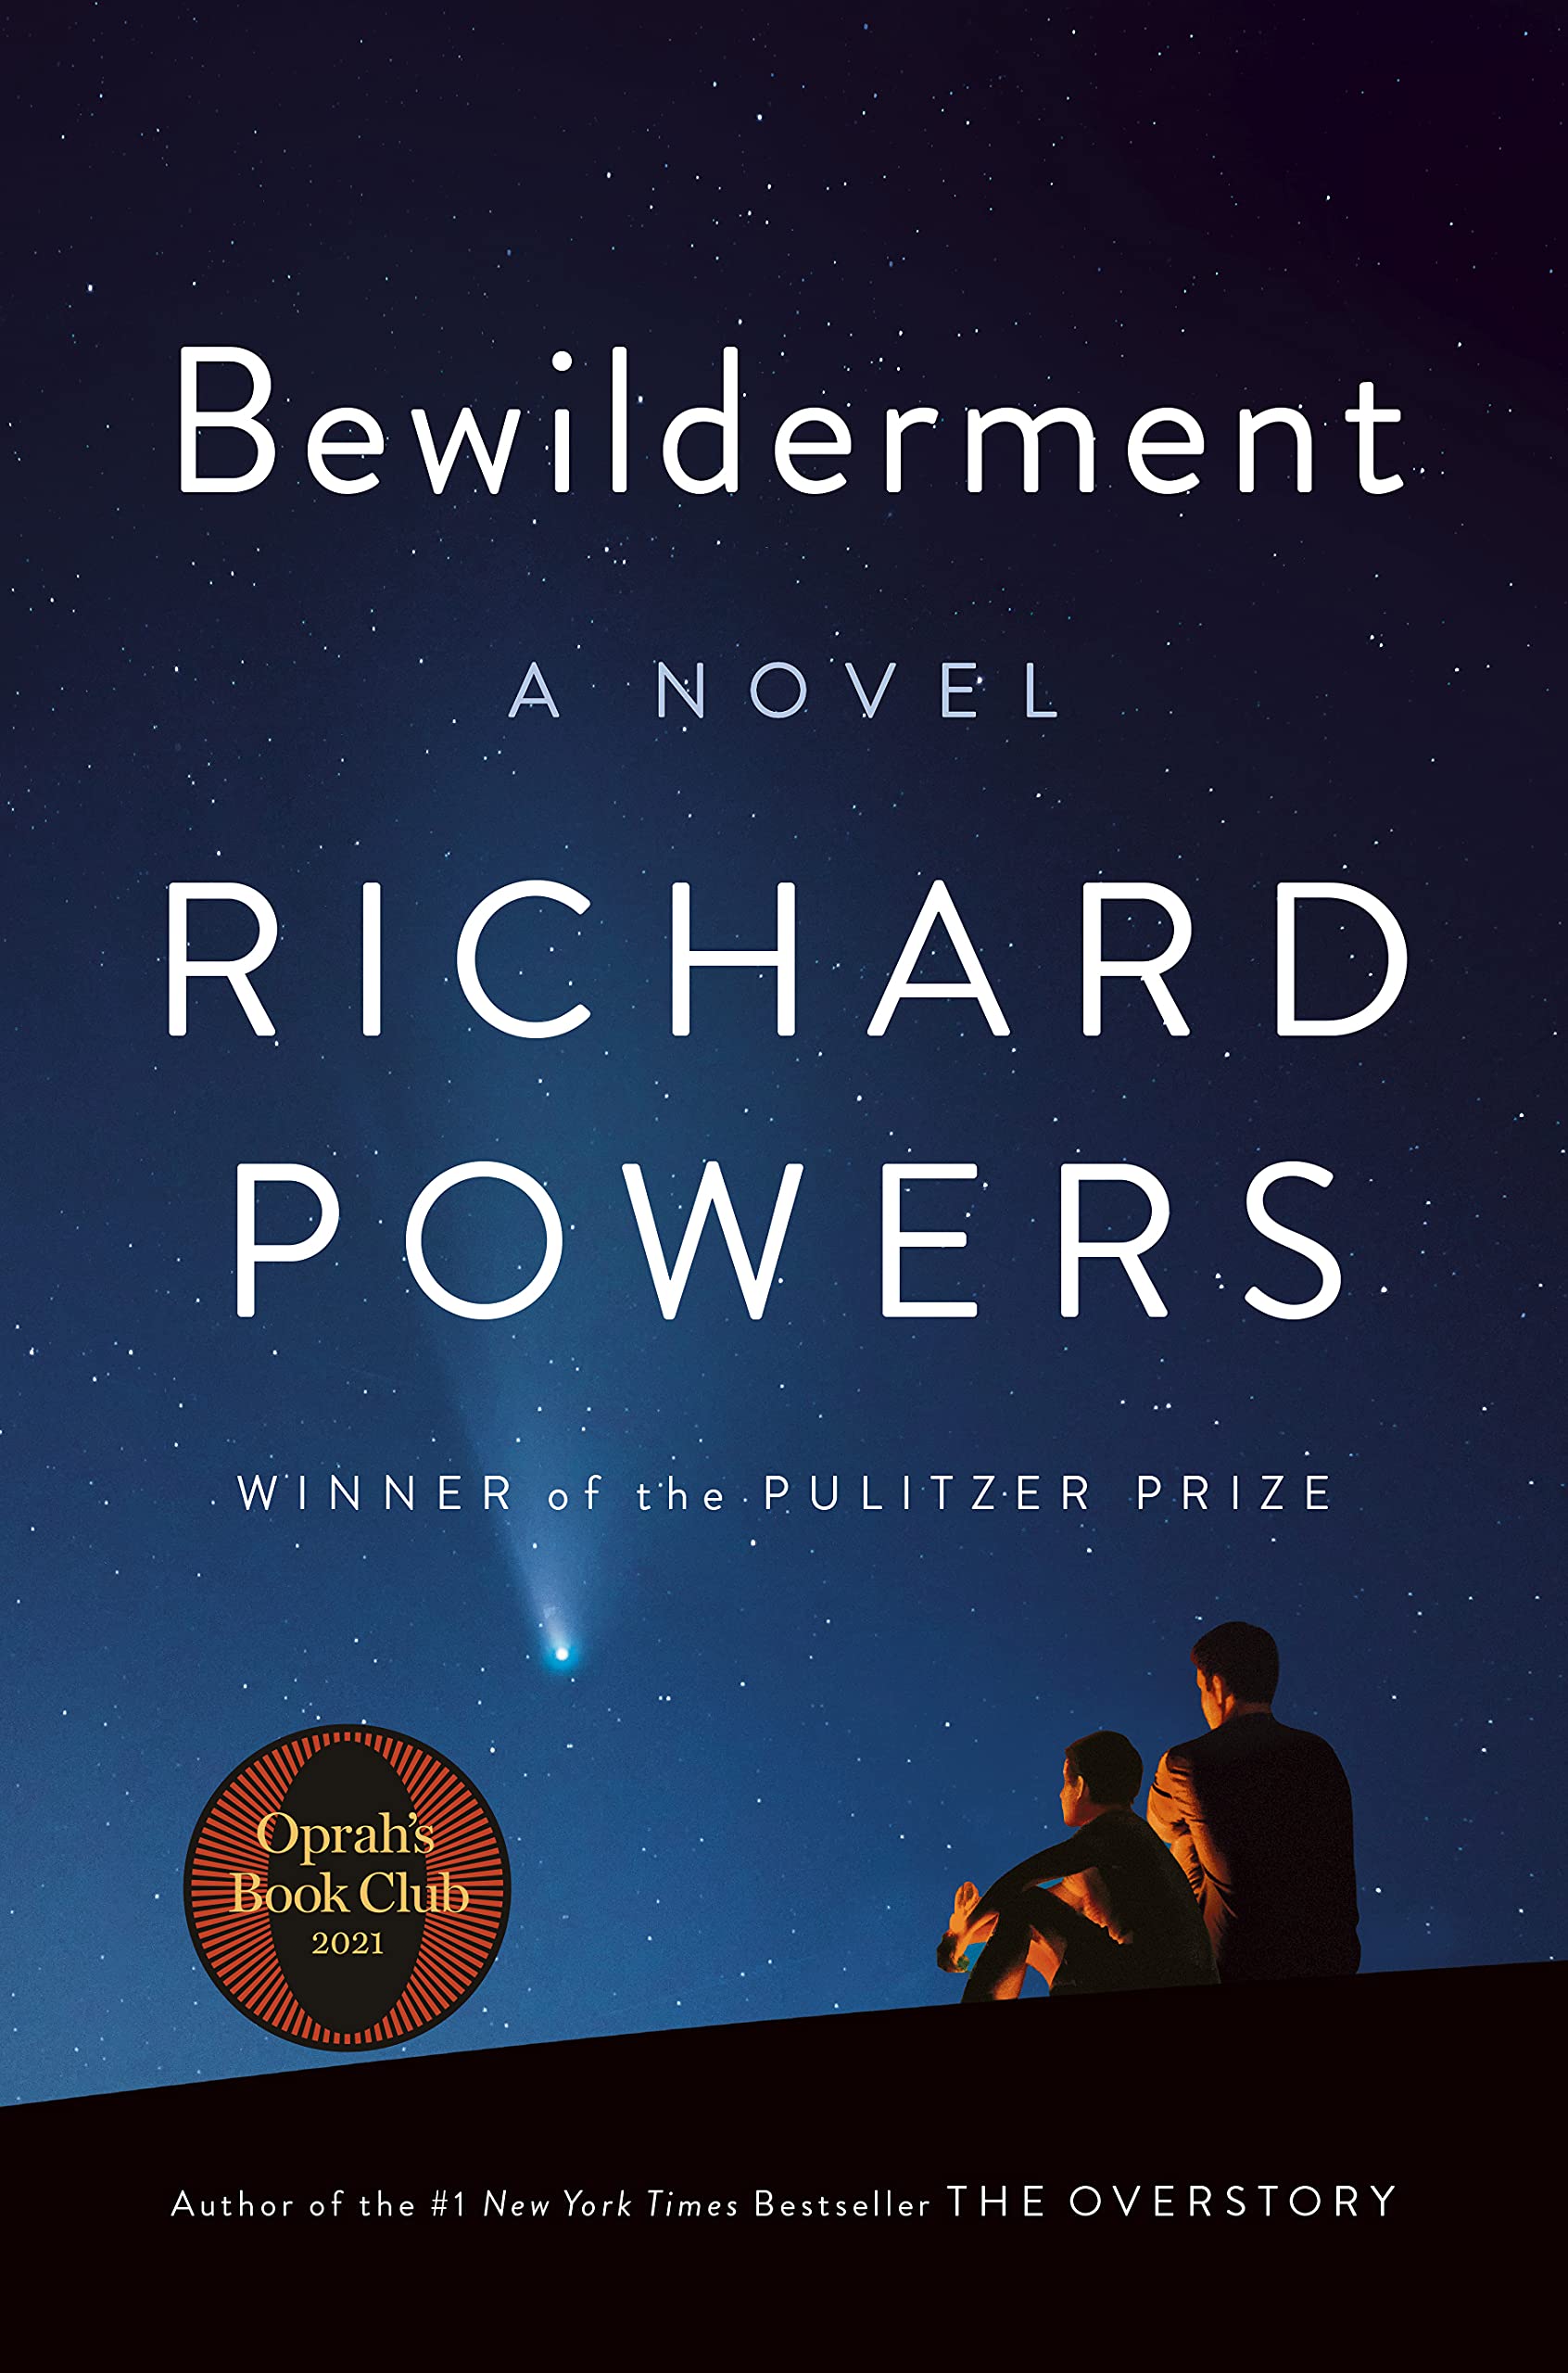 Cover of Bewilderment by Richard Powers